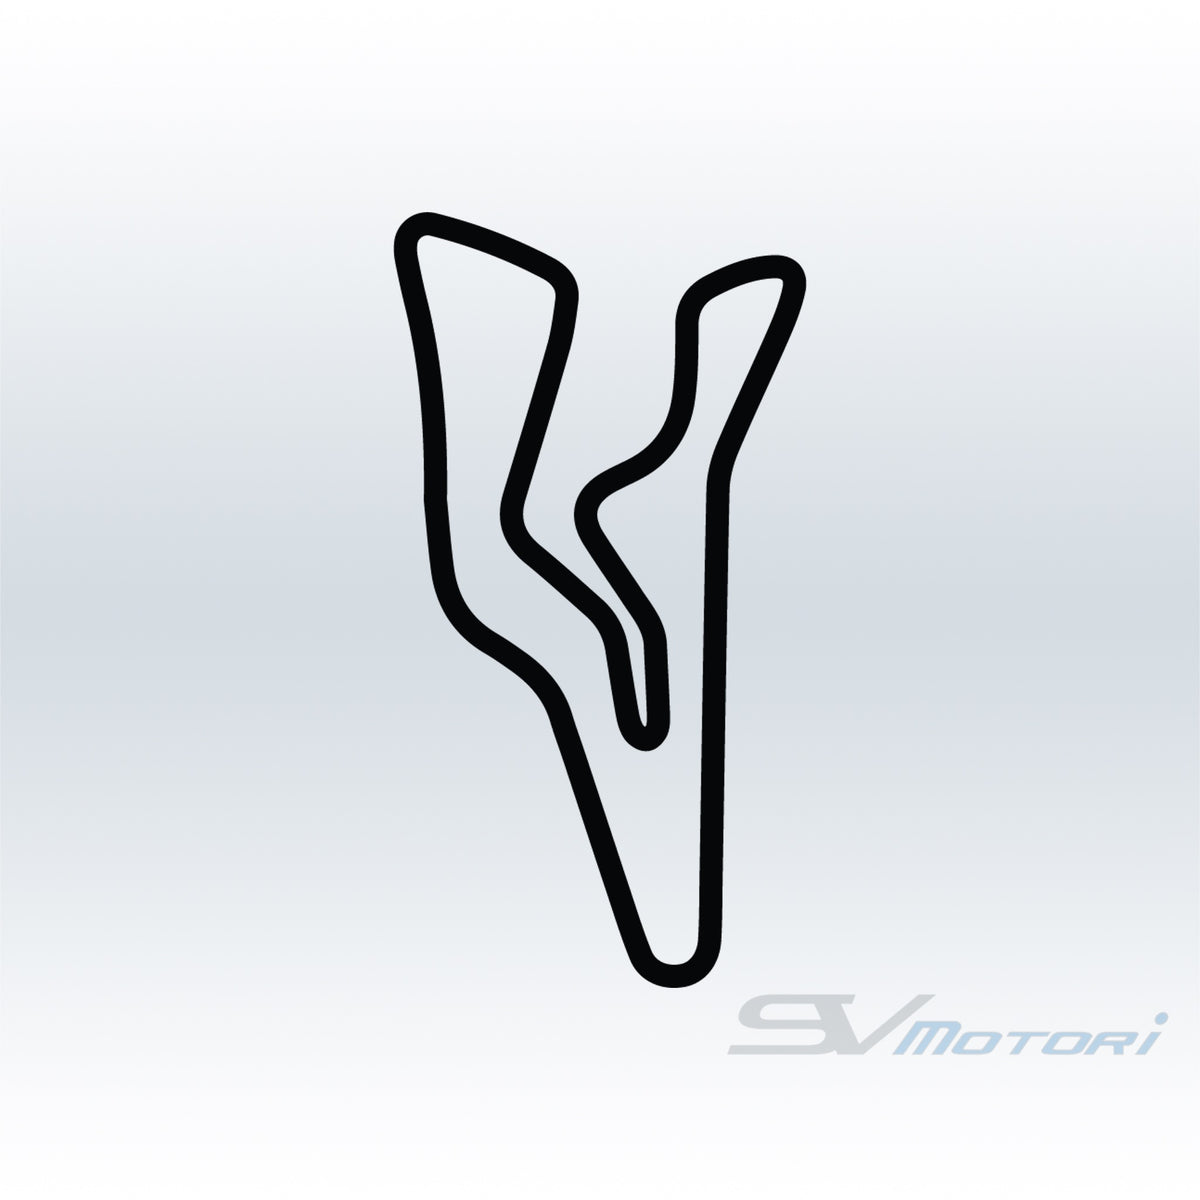 Second Creek Raceway Track Outline Decal